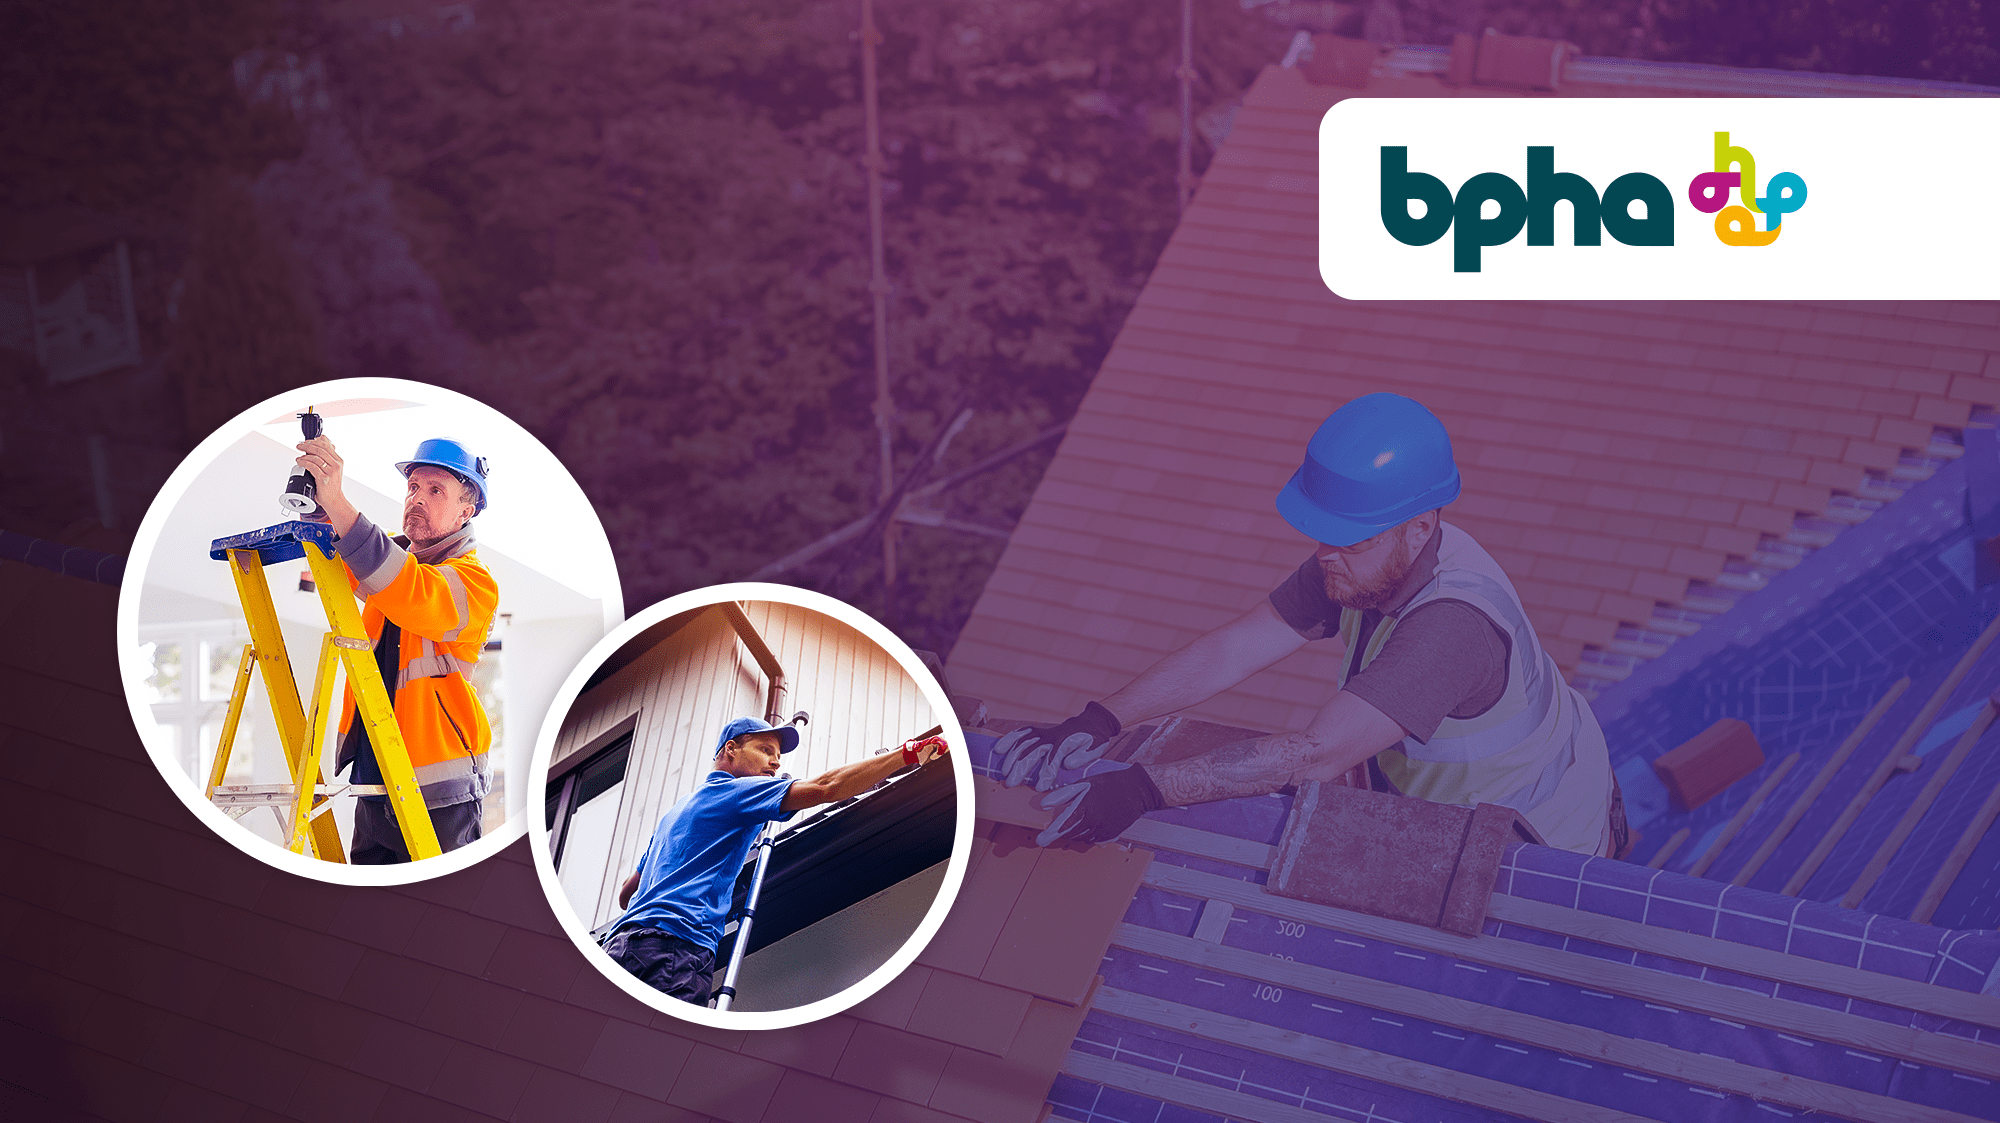 BPHA to In-Source & Digitalize Housing Repair Service Amid Rising Industry Costs & UK Skills Shortage